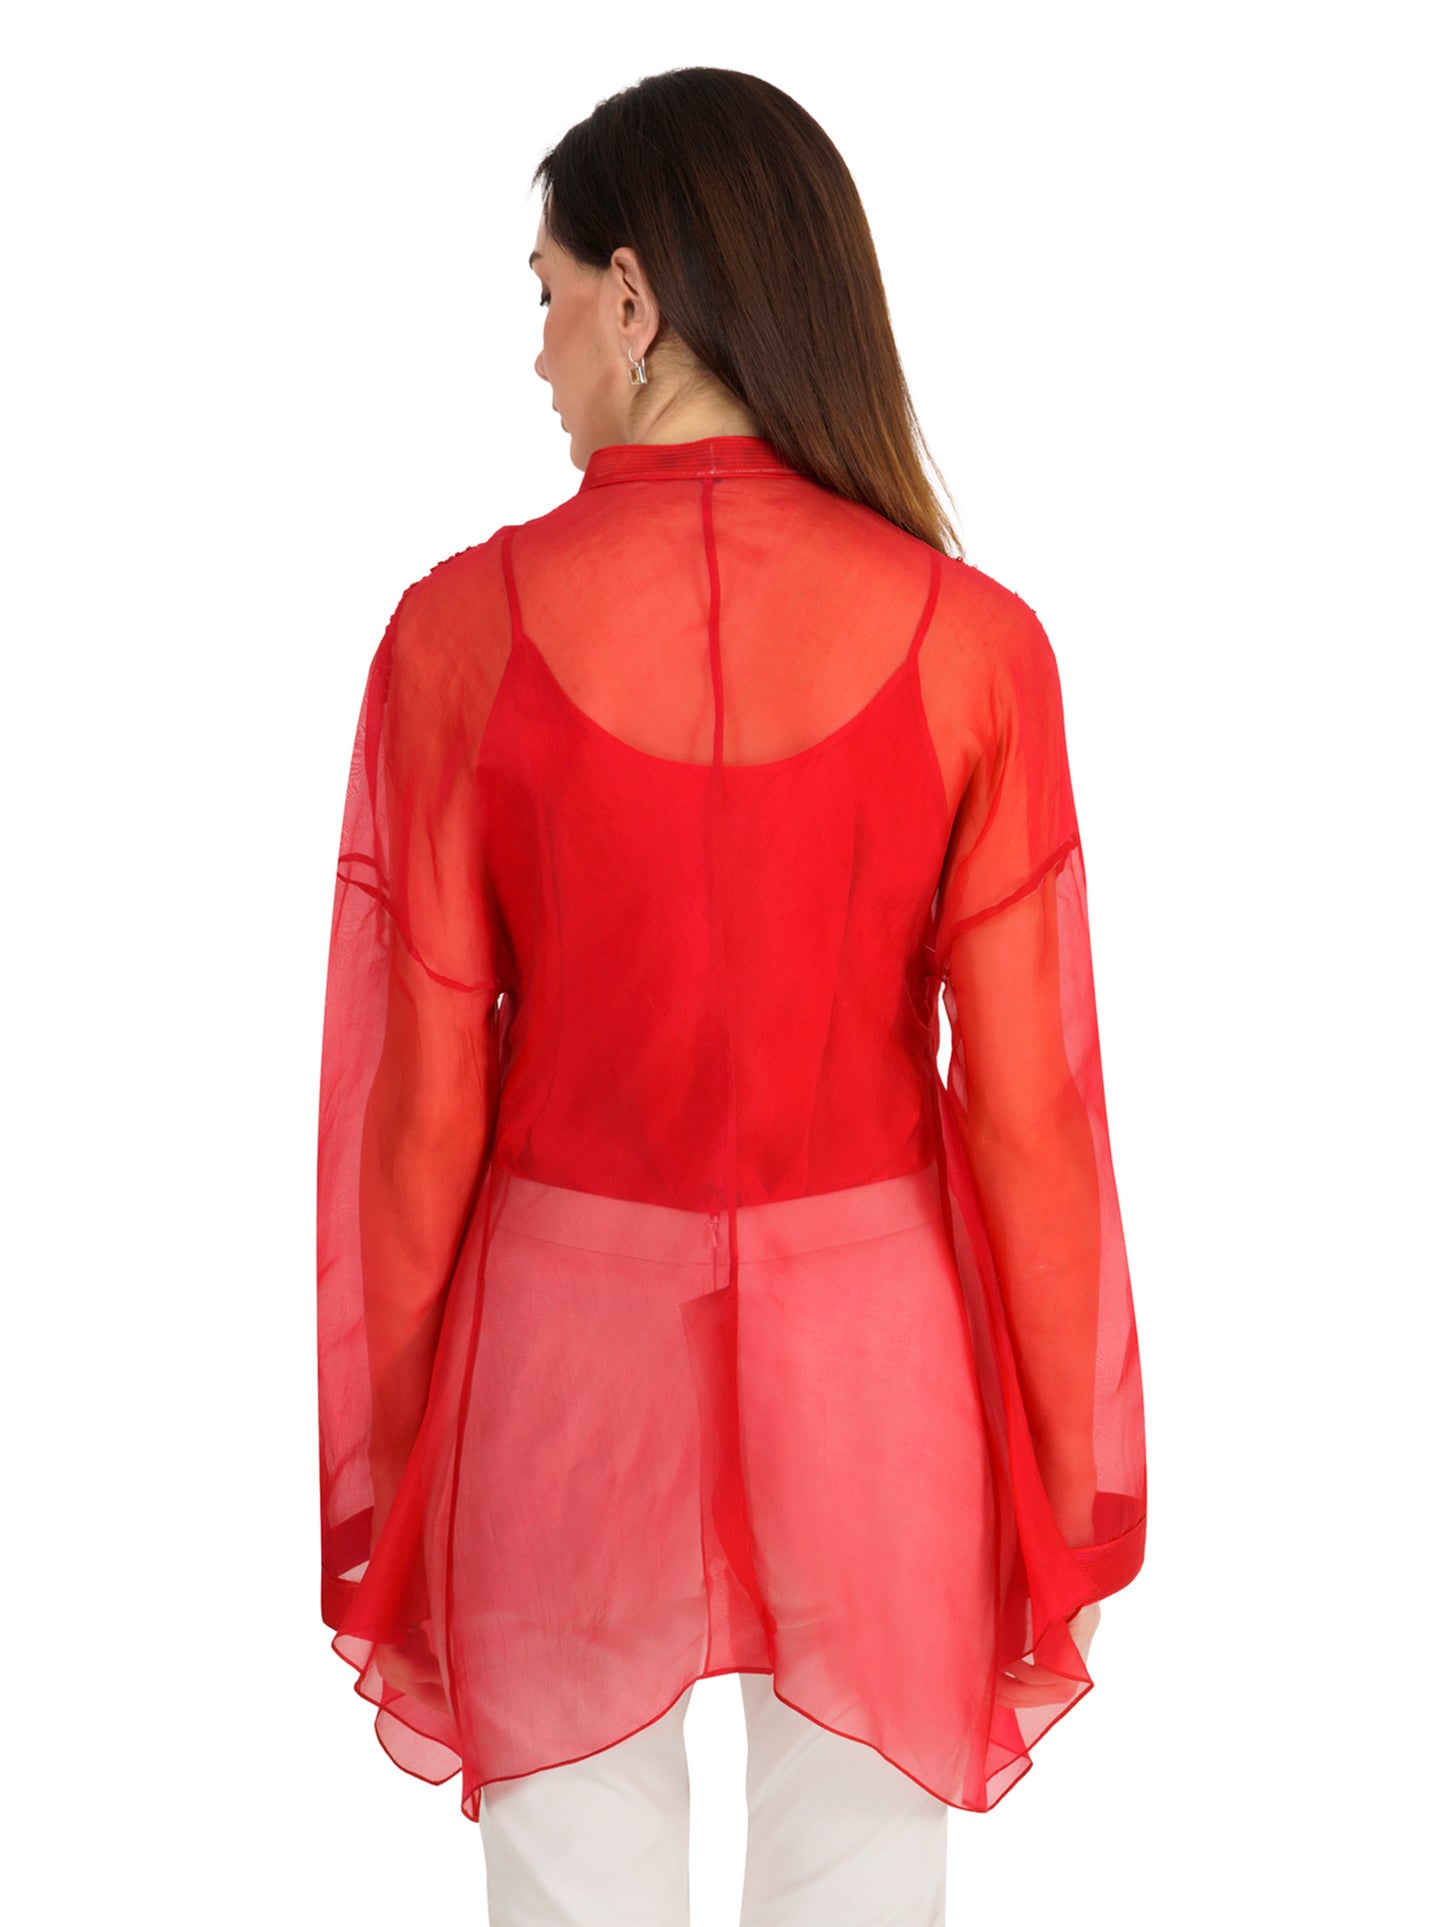 Fushia Embroidered Front Open Top With Belt